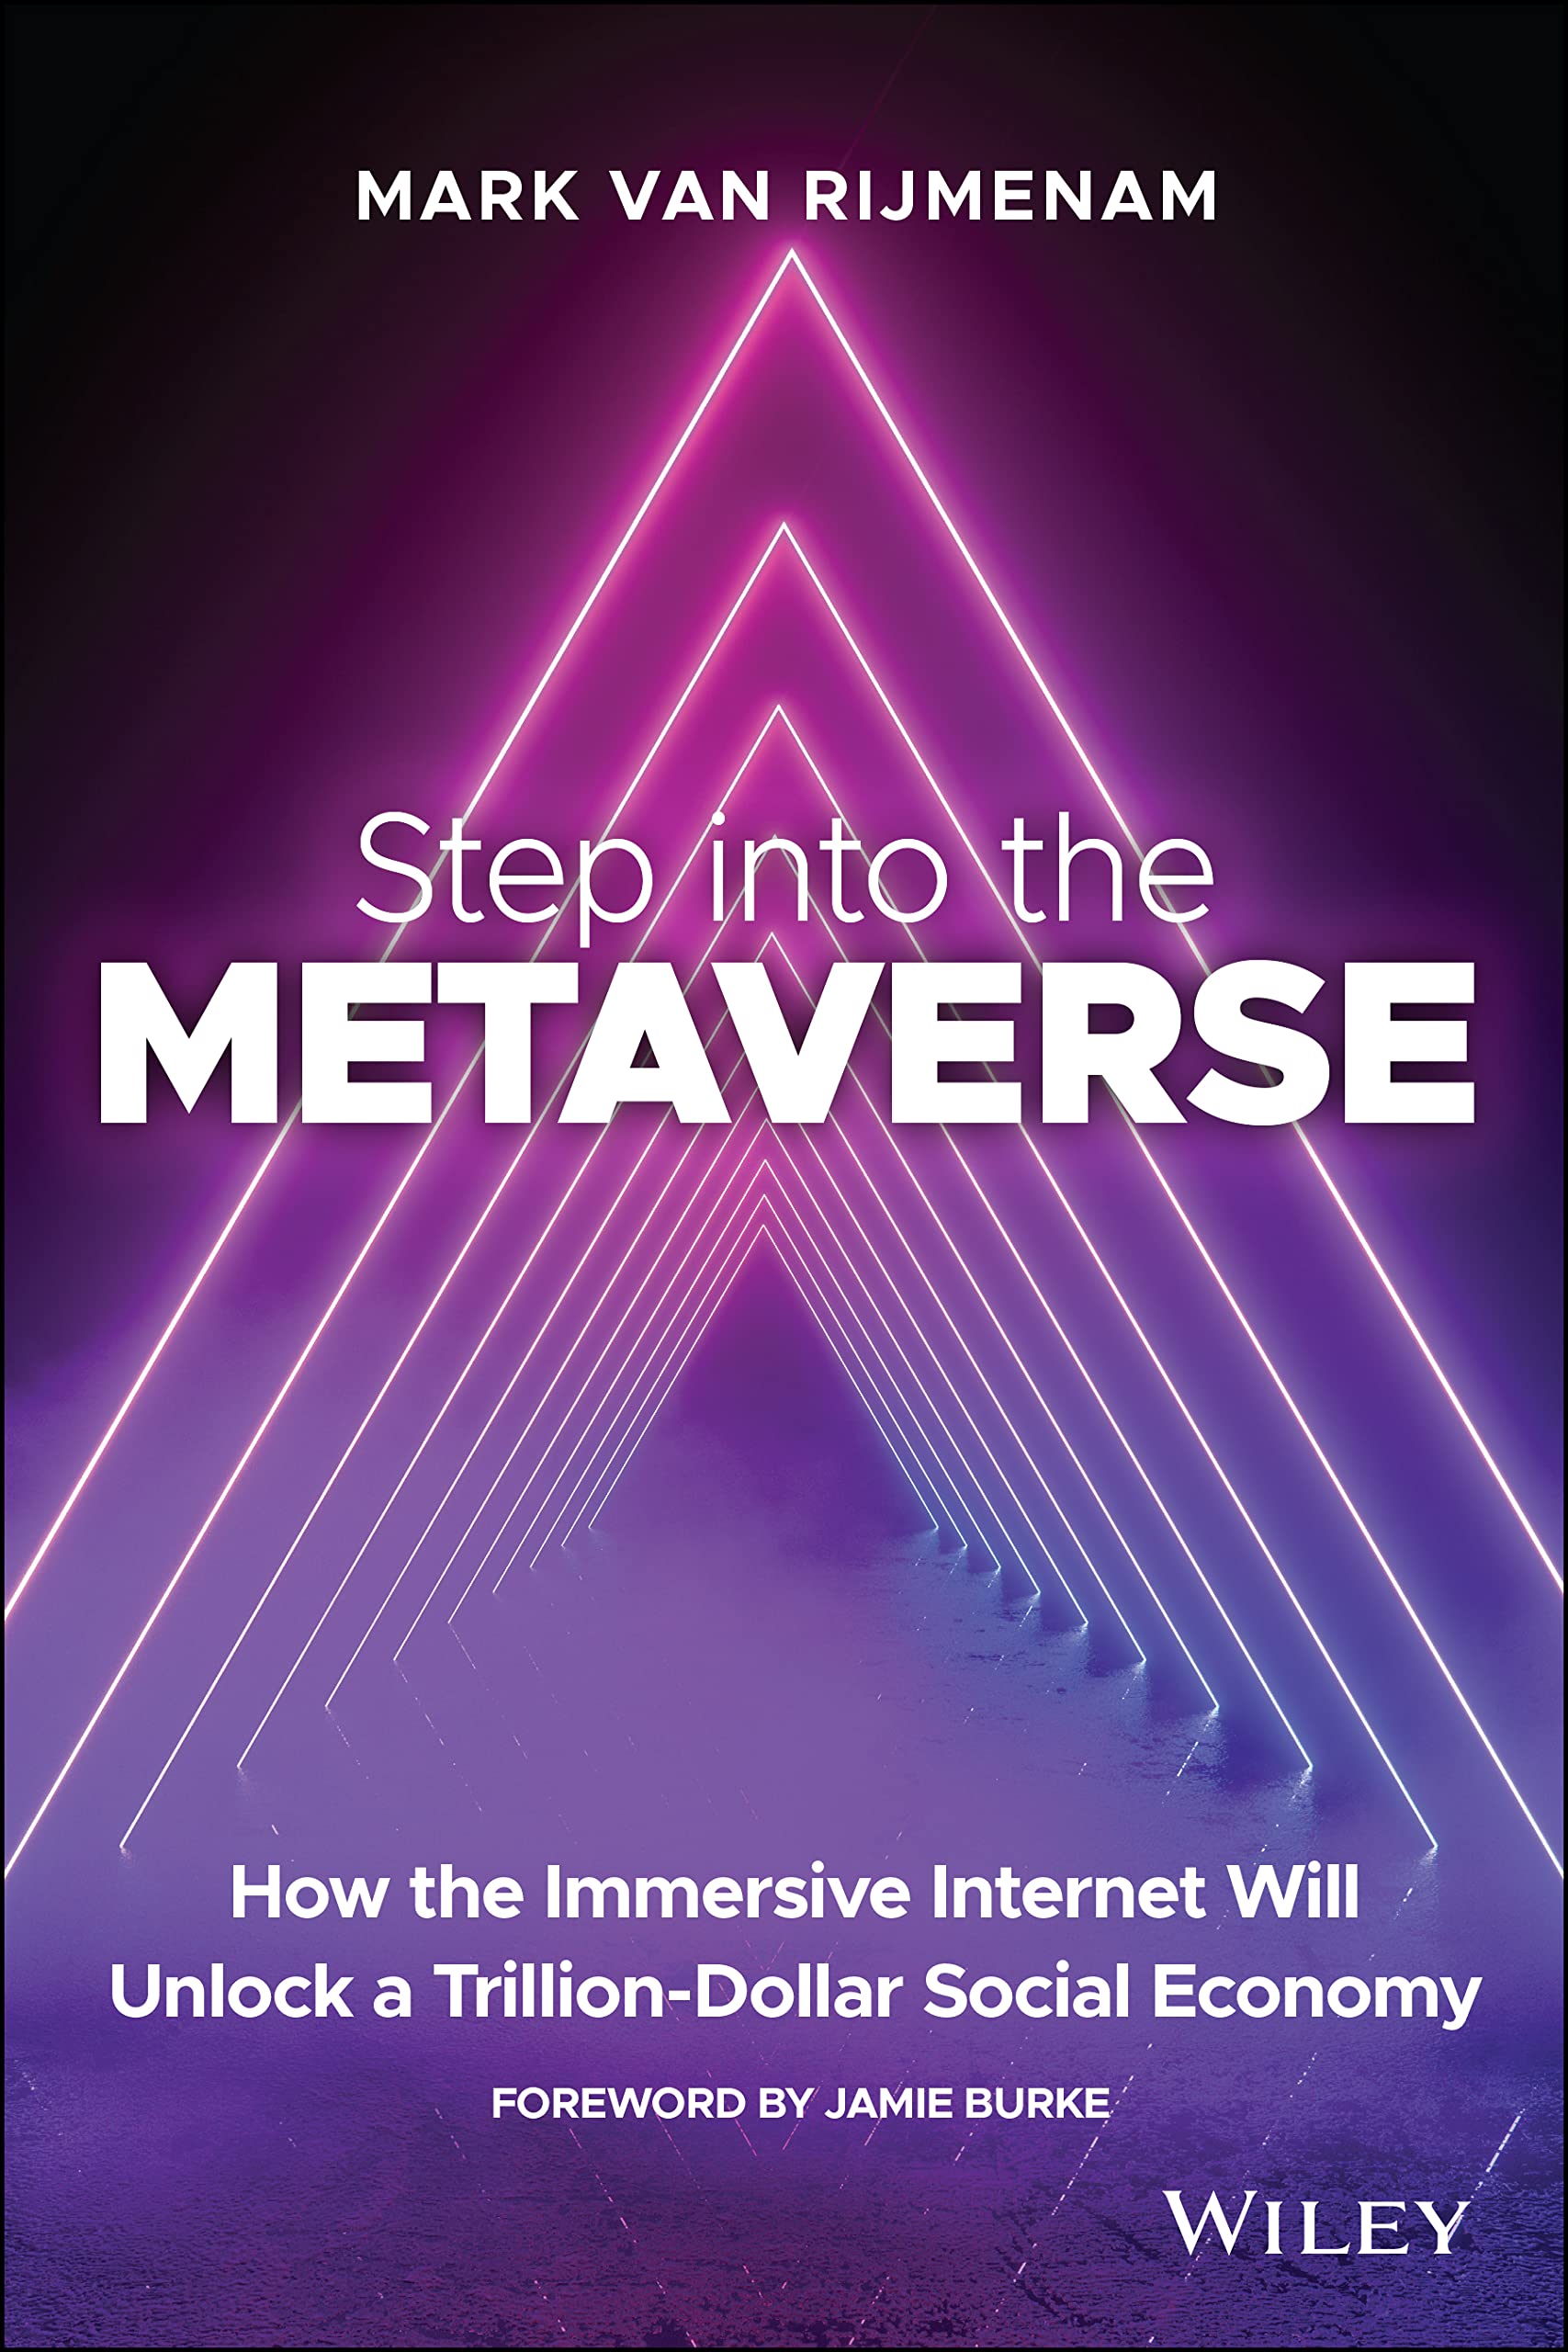 Step Into the Metaverse: How the Immersive Internet Will Unlock a Trillion-Dollar Social Economy (Paperback)